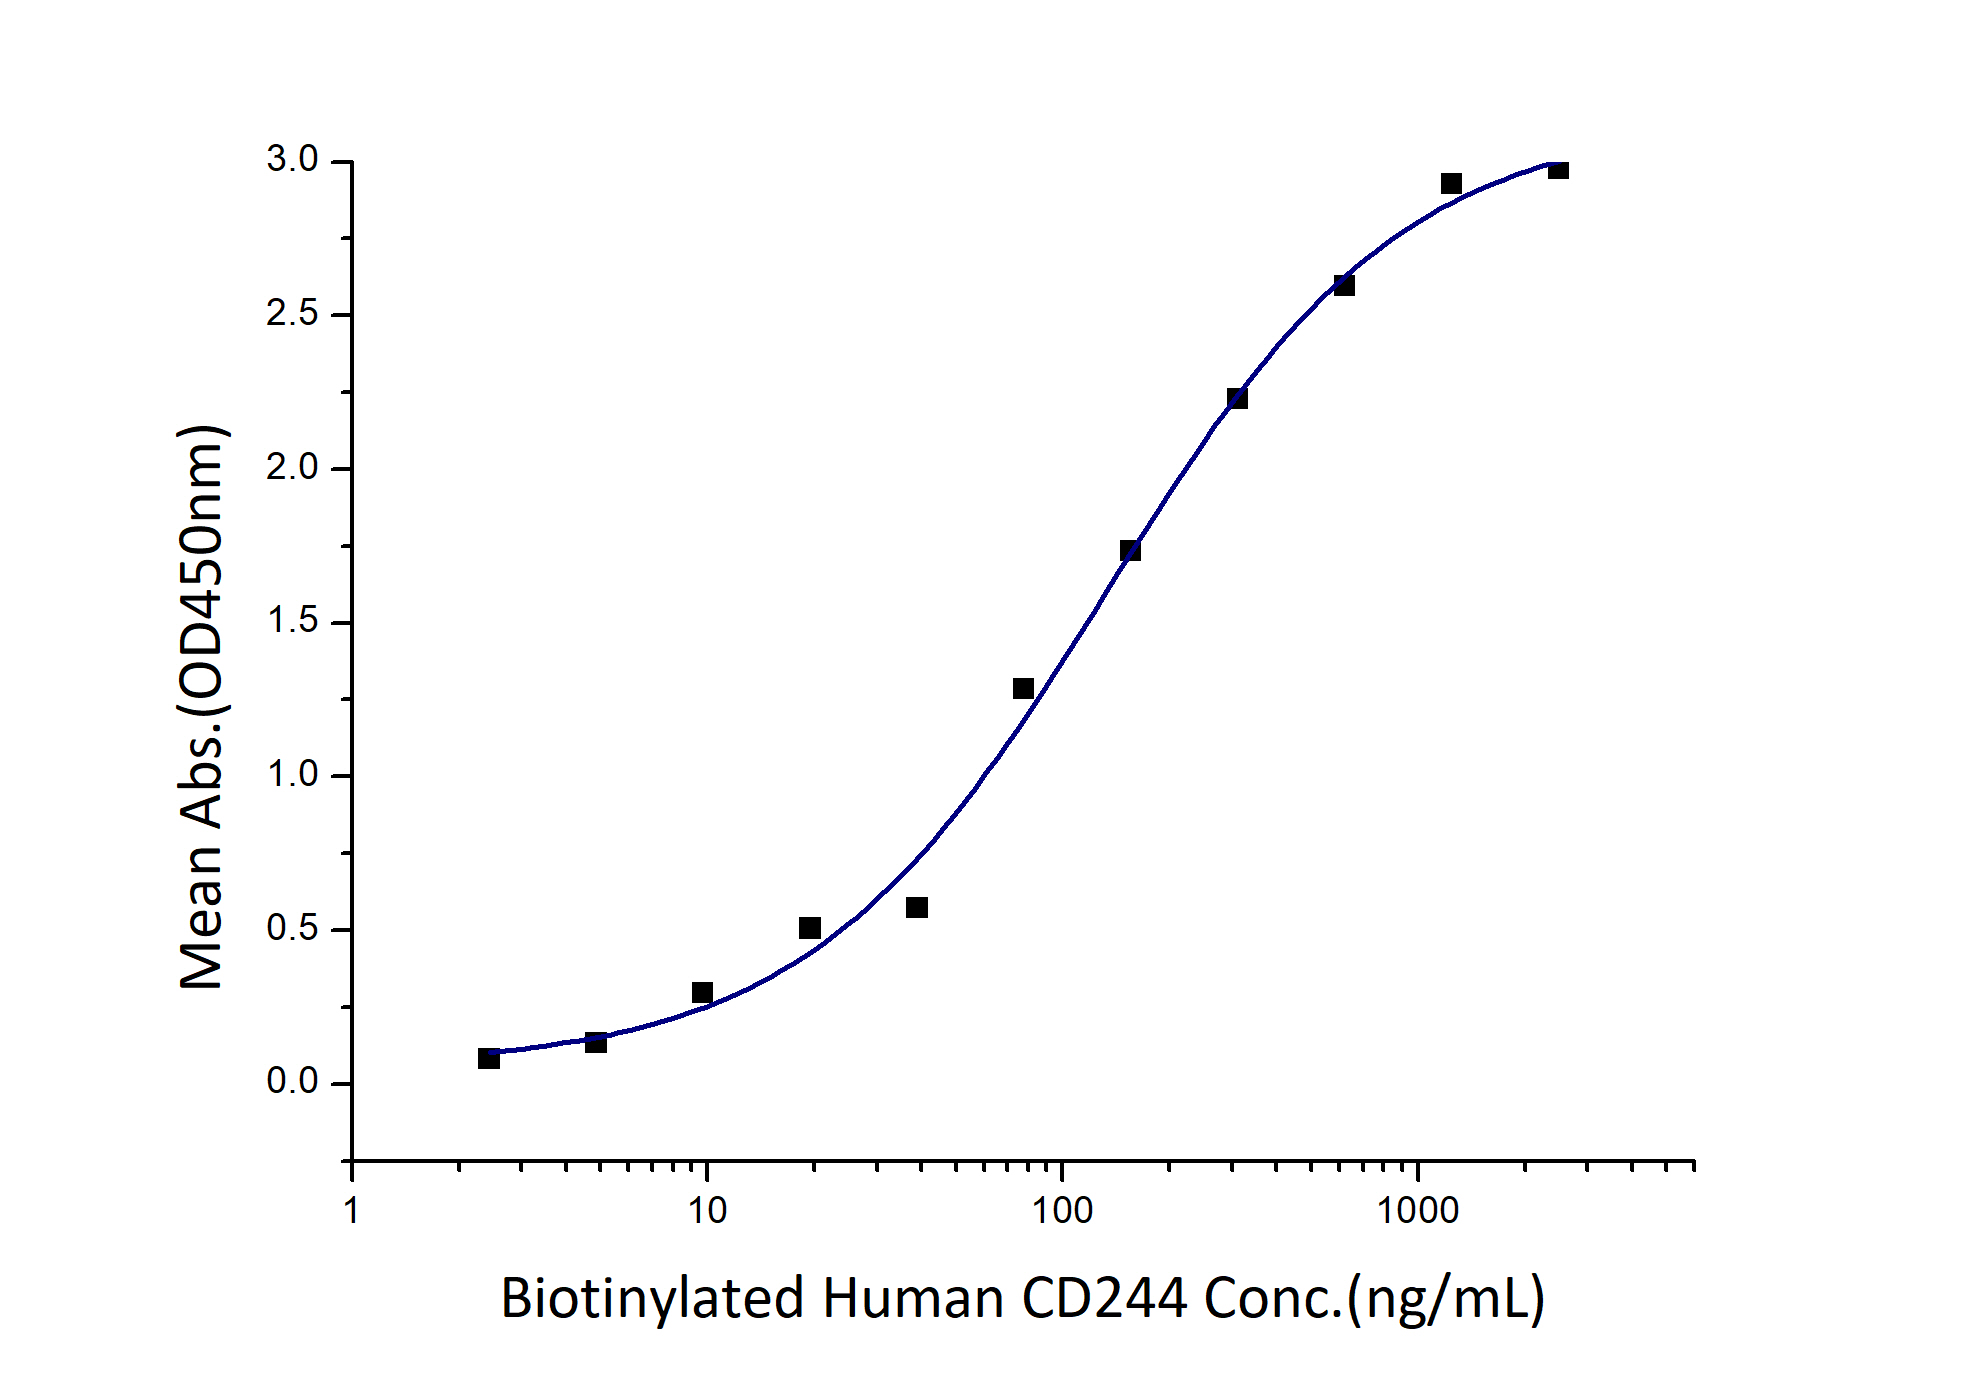 Immobilized Human CD48 (Myc tag, His tag) at 2 μg/mL (100 μL/well) can bind Biotinylated Human CD244 (hFc tag, Myc tag, His tag) with a linear range of 66-264 ng/mL.